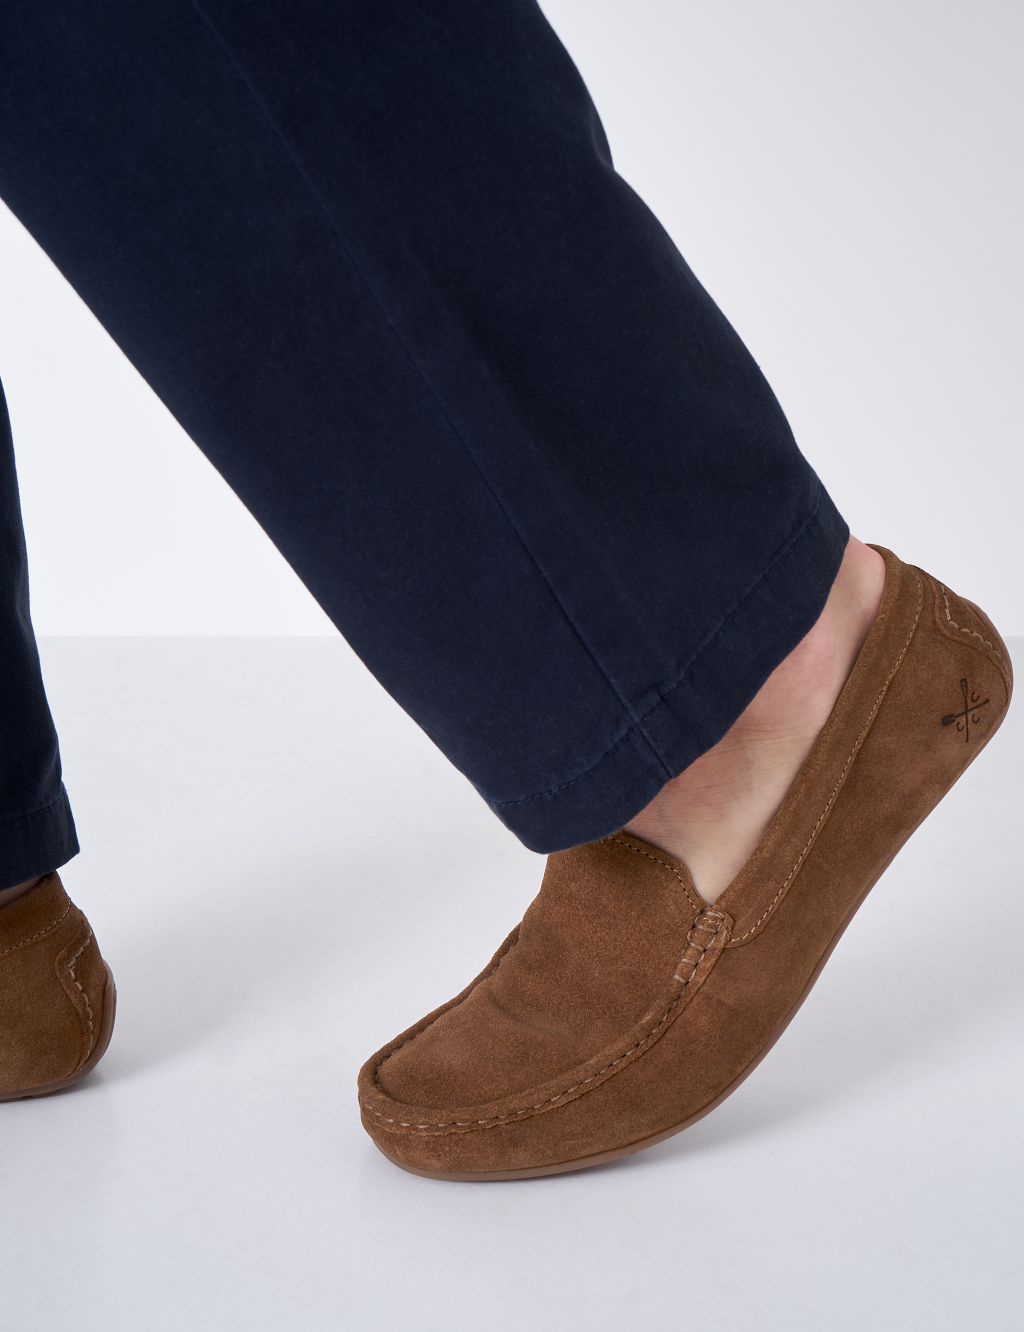 Suede Slip-On Loafers image 2